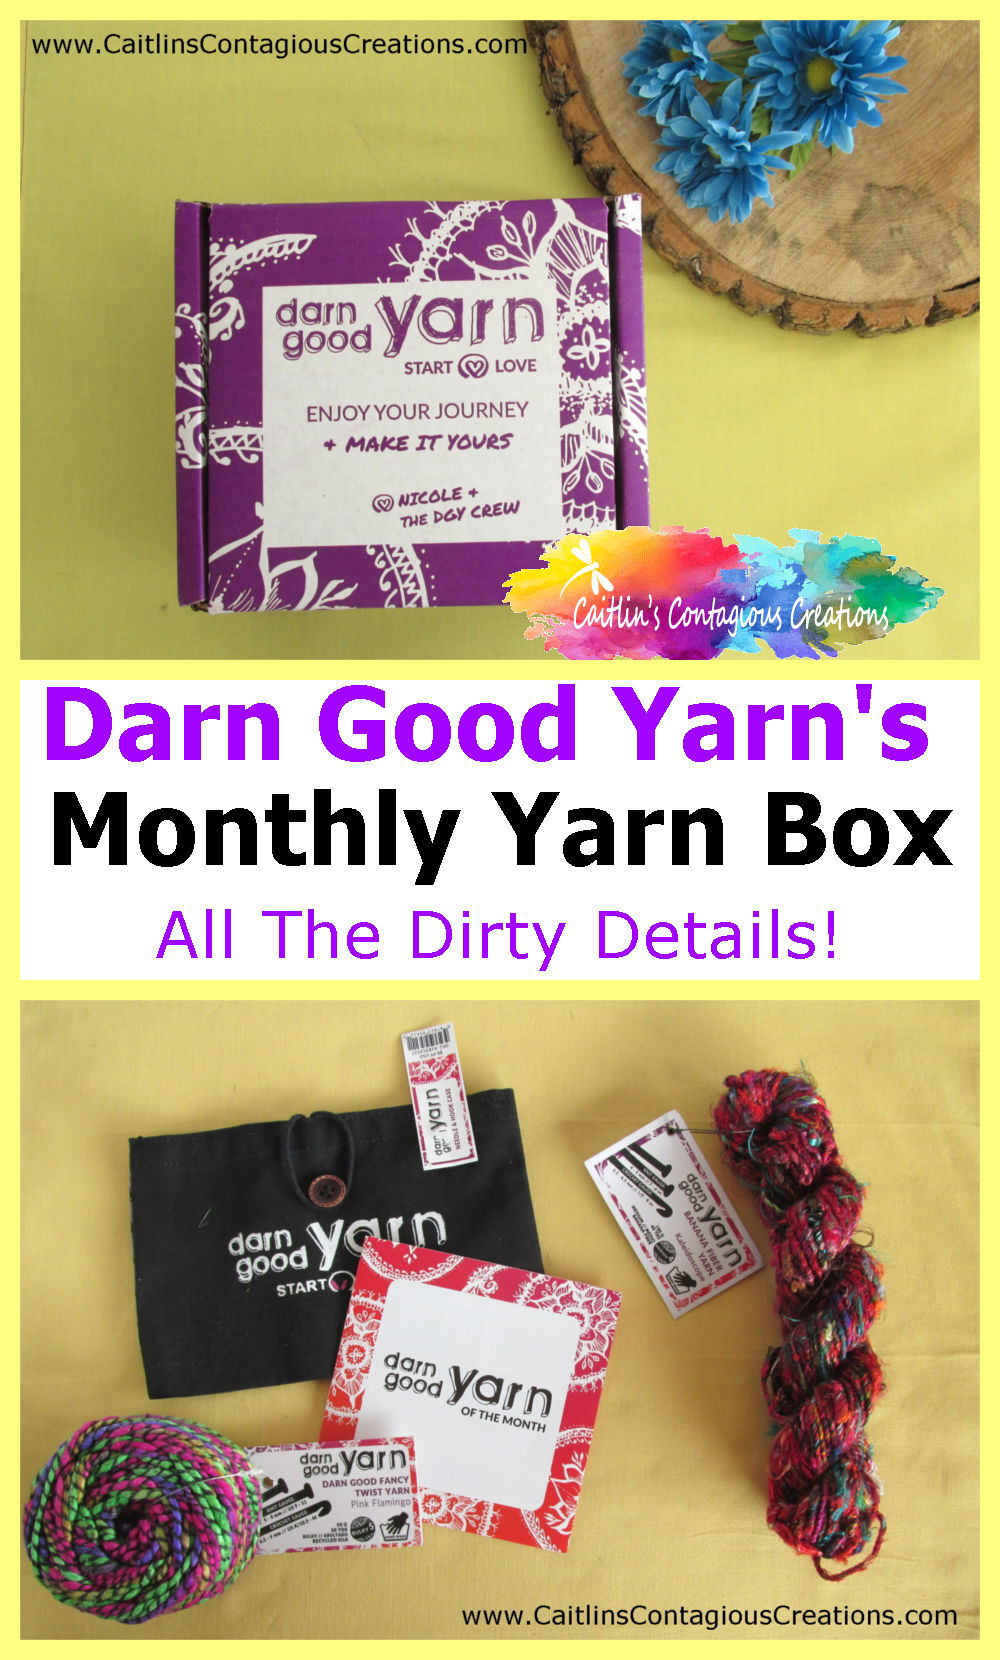 Honest review of Darn Good Yarn and their monthly yarn box. Get the details you want to know before you buy this yarn subscription for crochet and knitters. #TruthAboutDarnGoodYarn